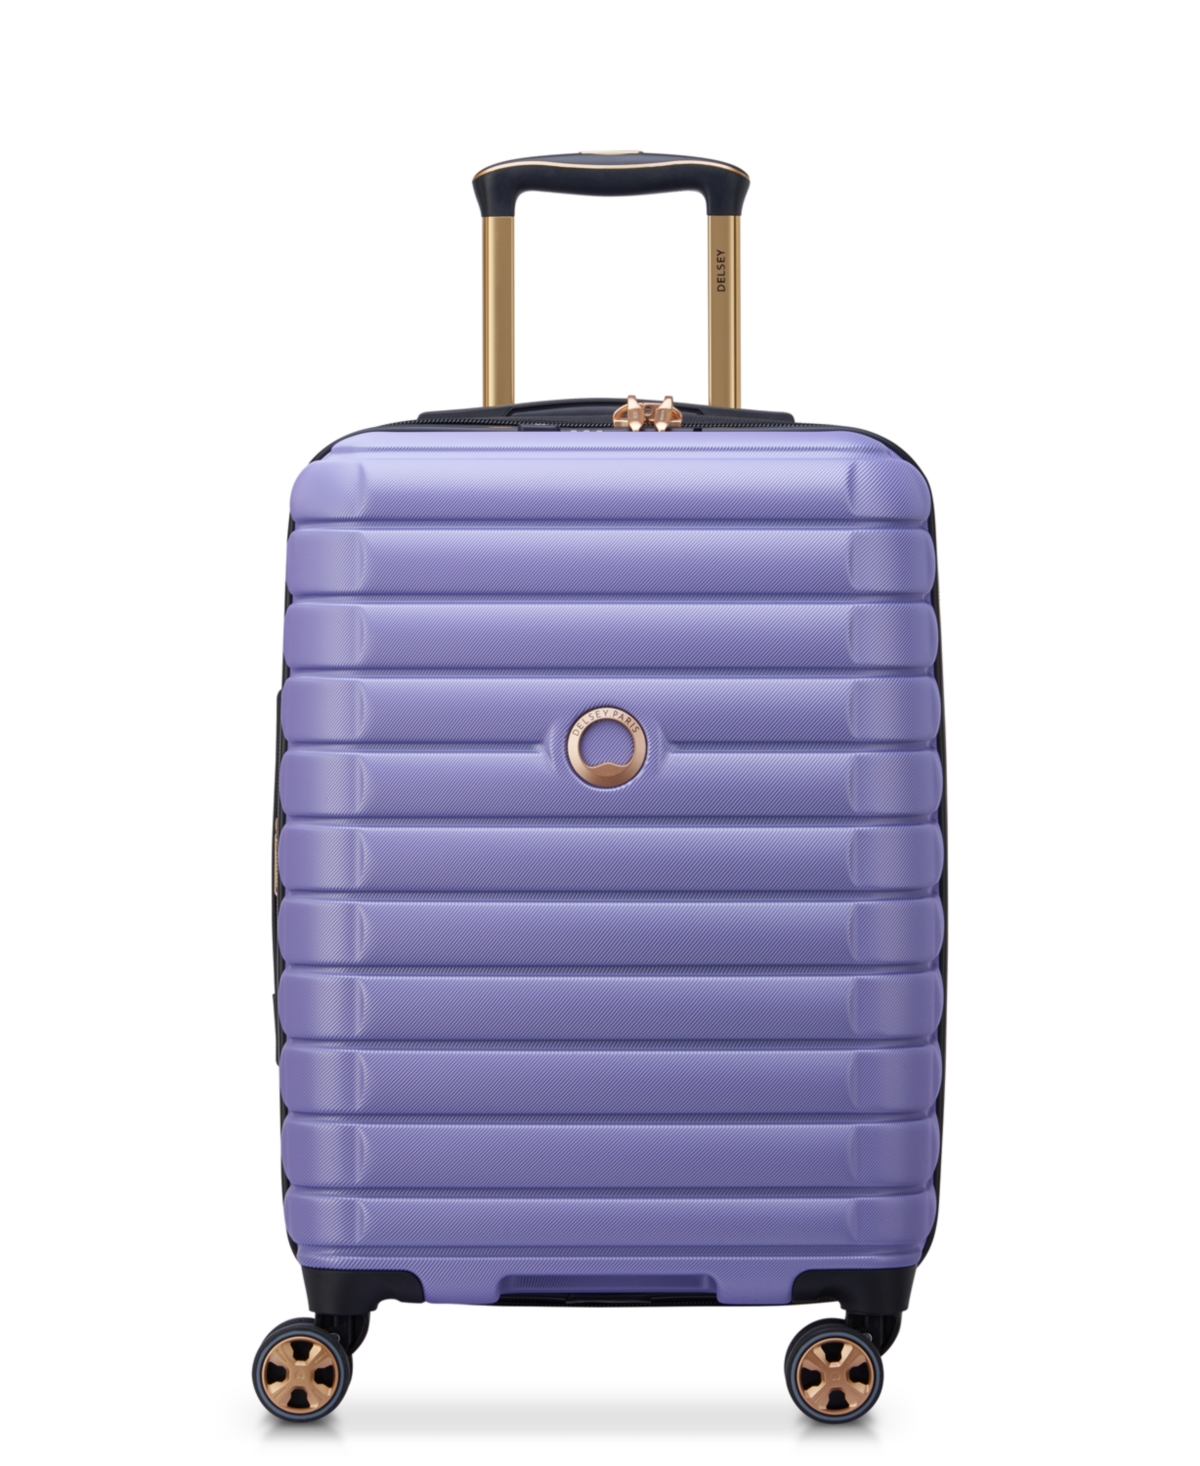 Delsey Shadow 5.0 Expandable 20" Spinner Carry On Luggage In Lilac